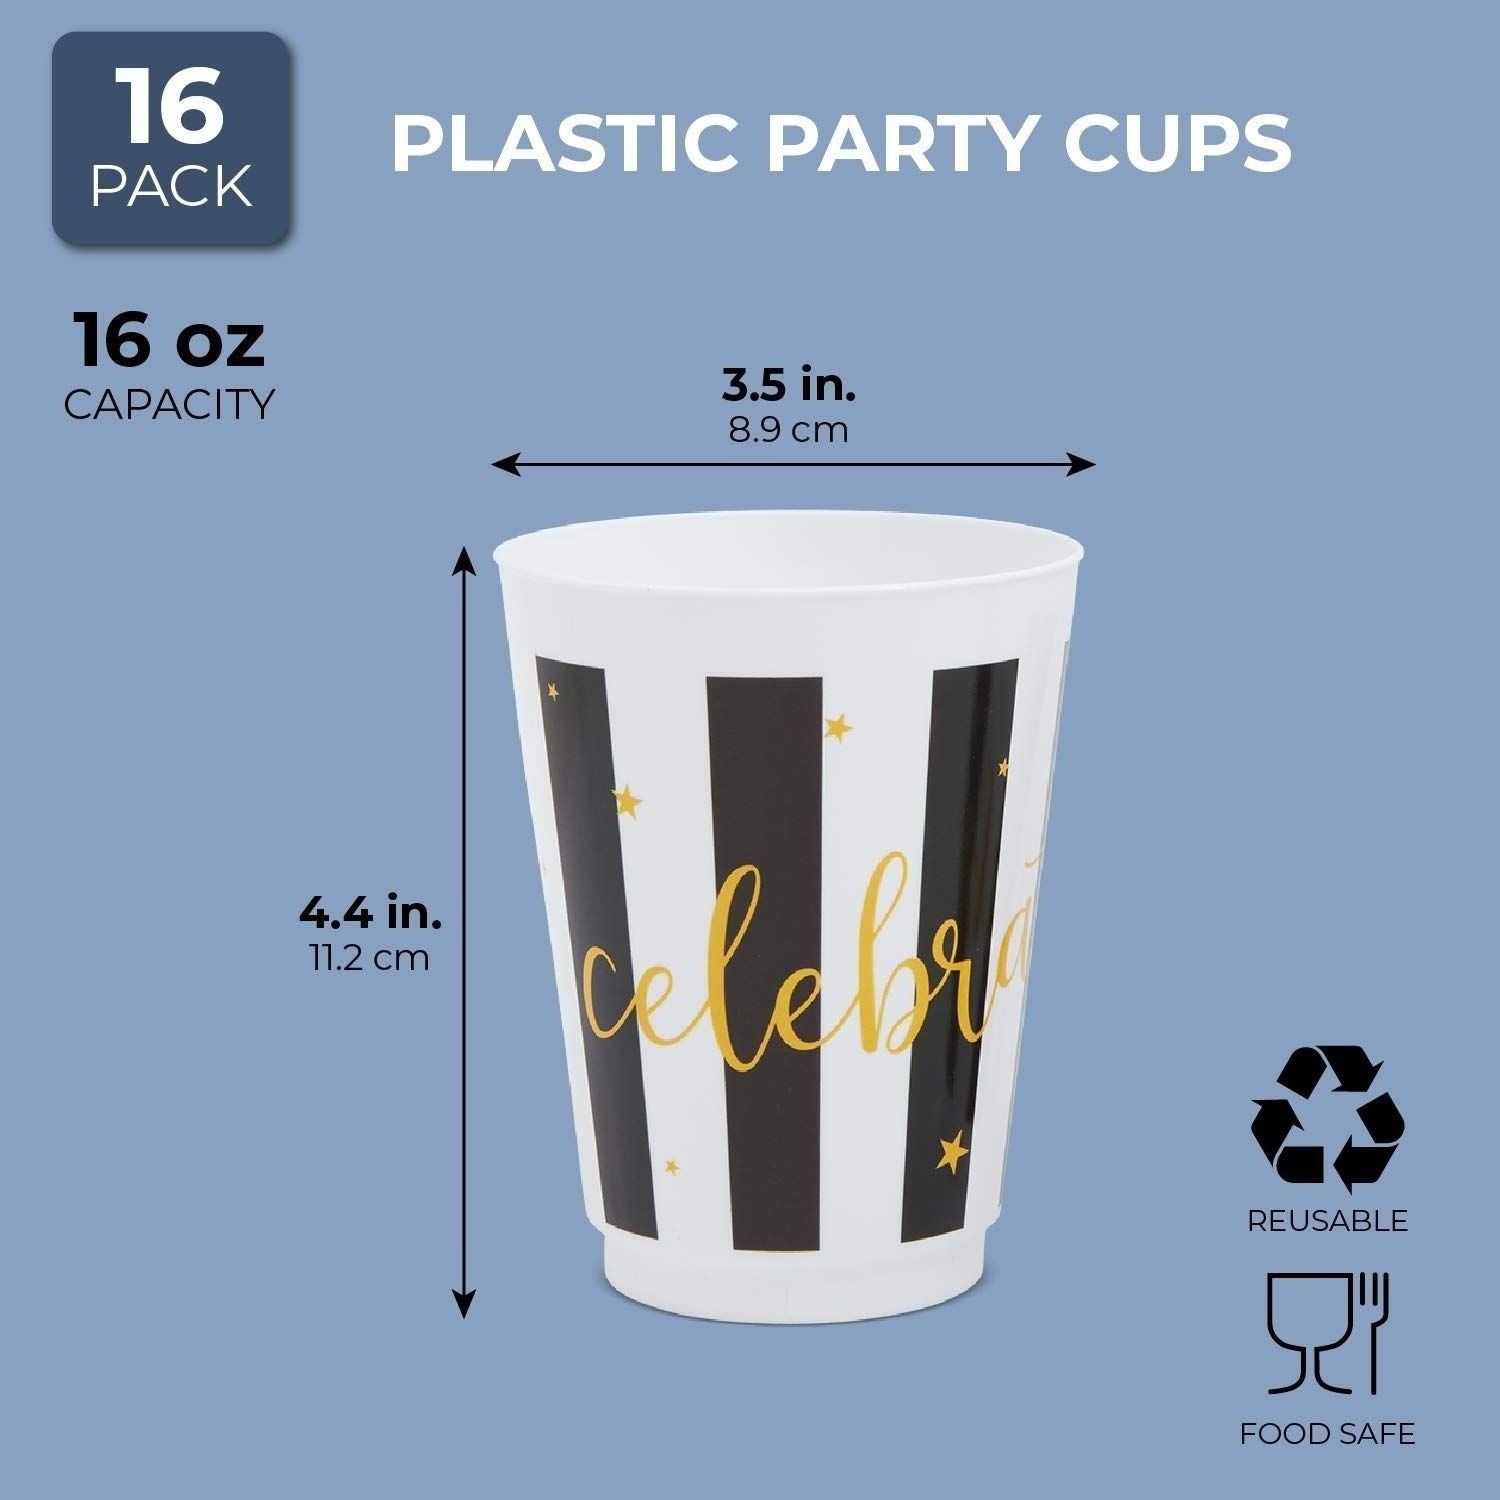 16x Plastic 16 oz Party Cups Celebrate Reusable Tumblers for